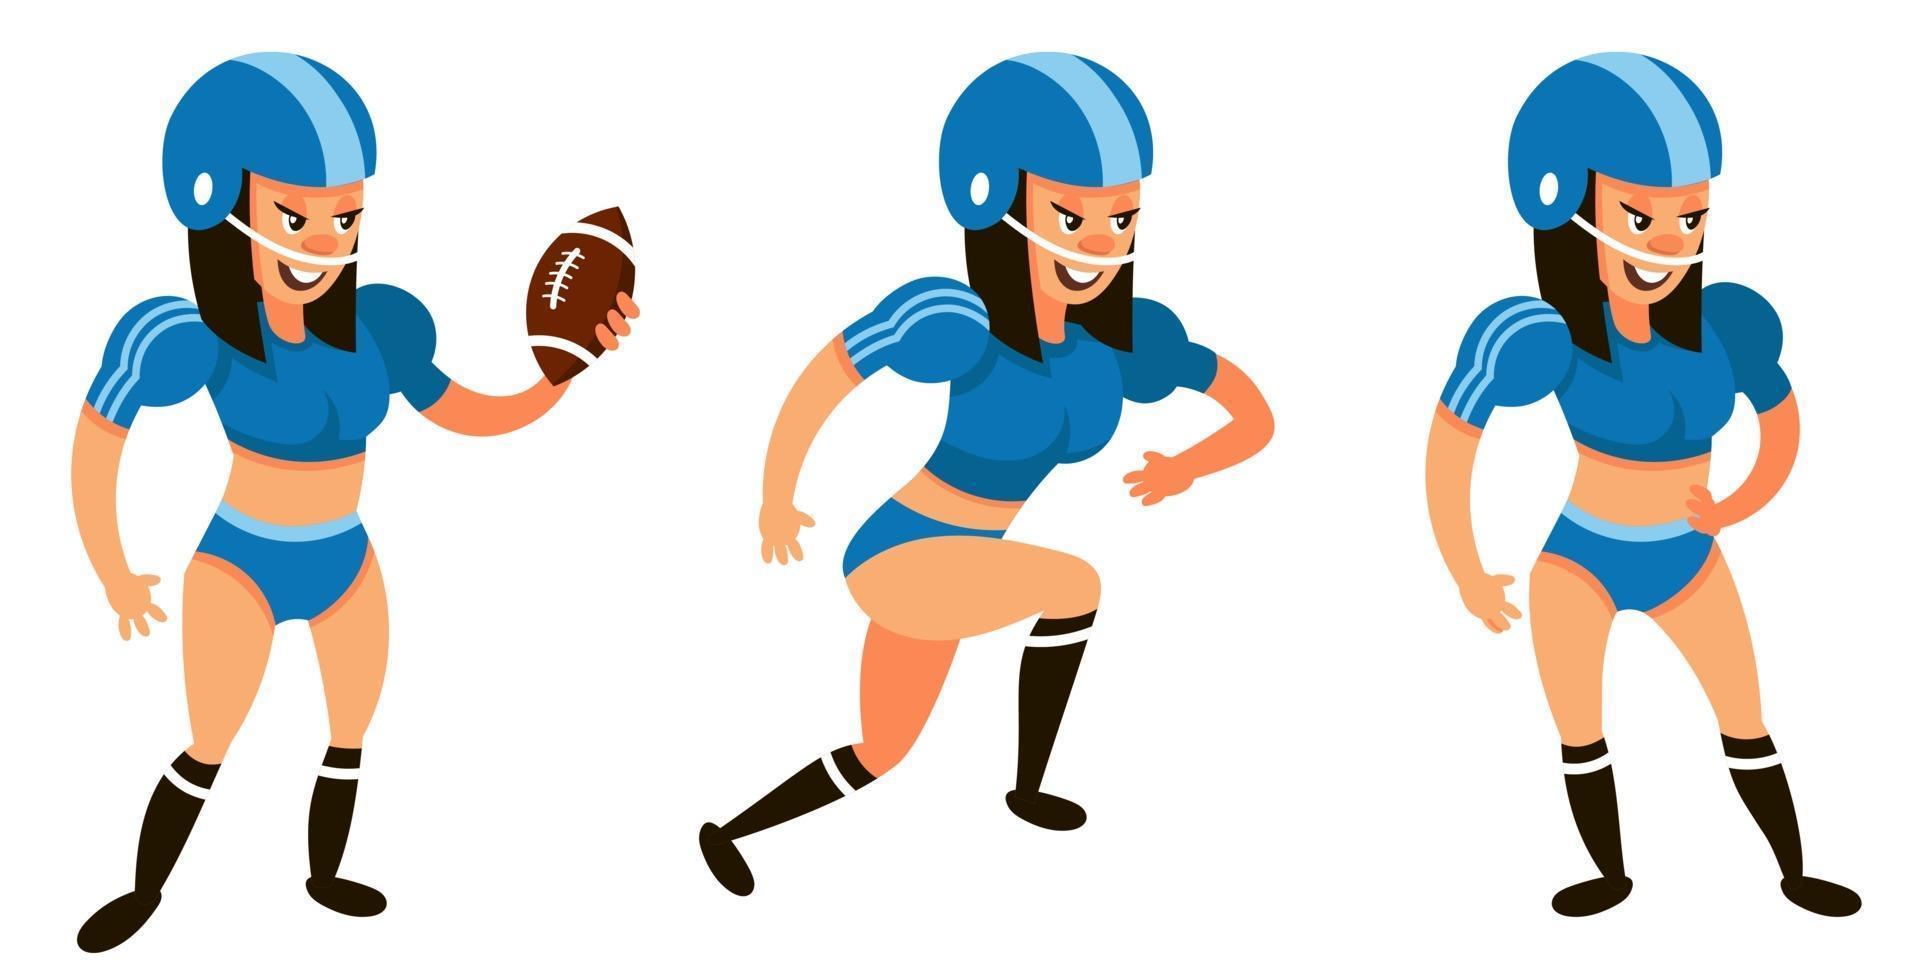 American football player in different poses. Female character in cartoon style. vector